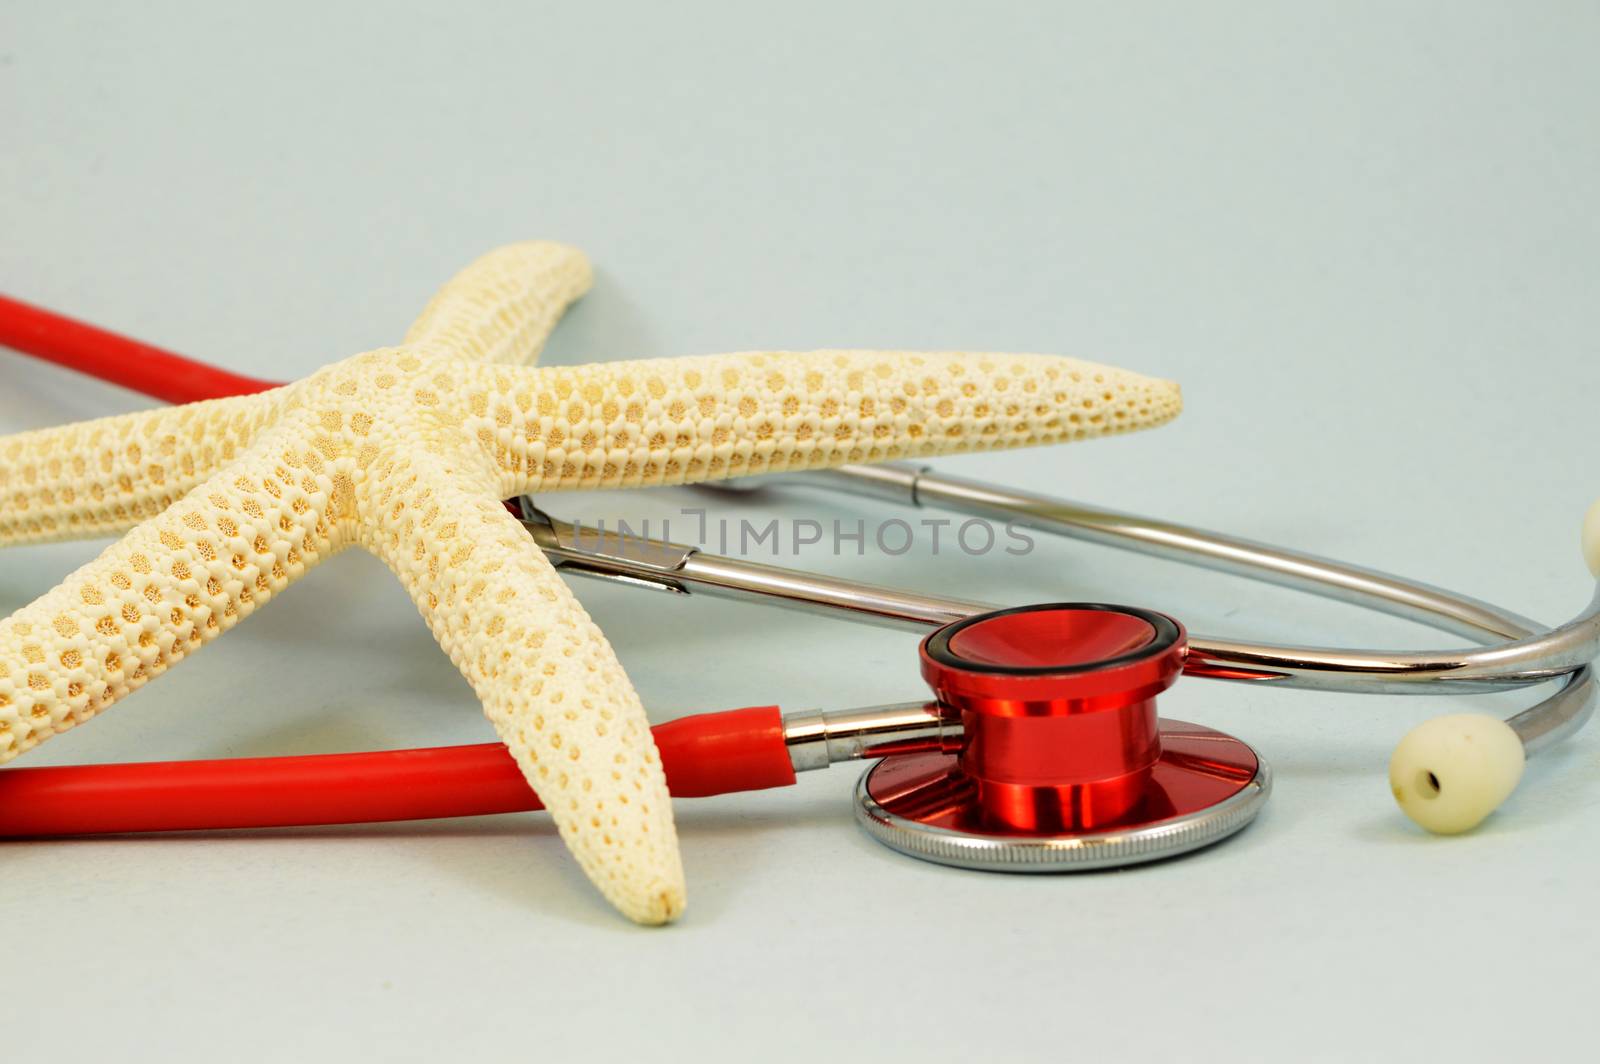 An illustrative tropical starfish and red medical stethoscope for concepts related to healthcare needed while on vacation.